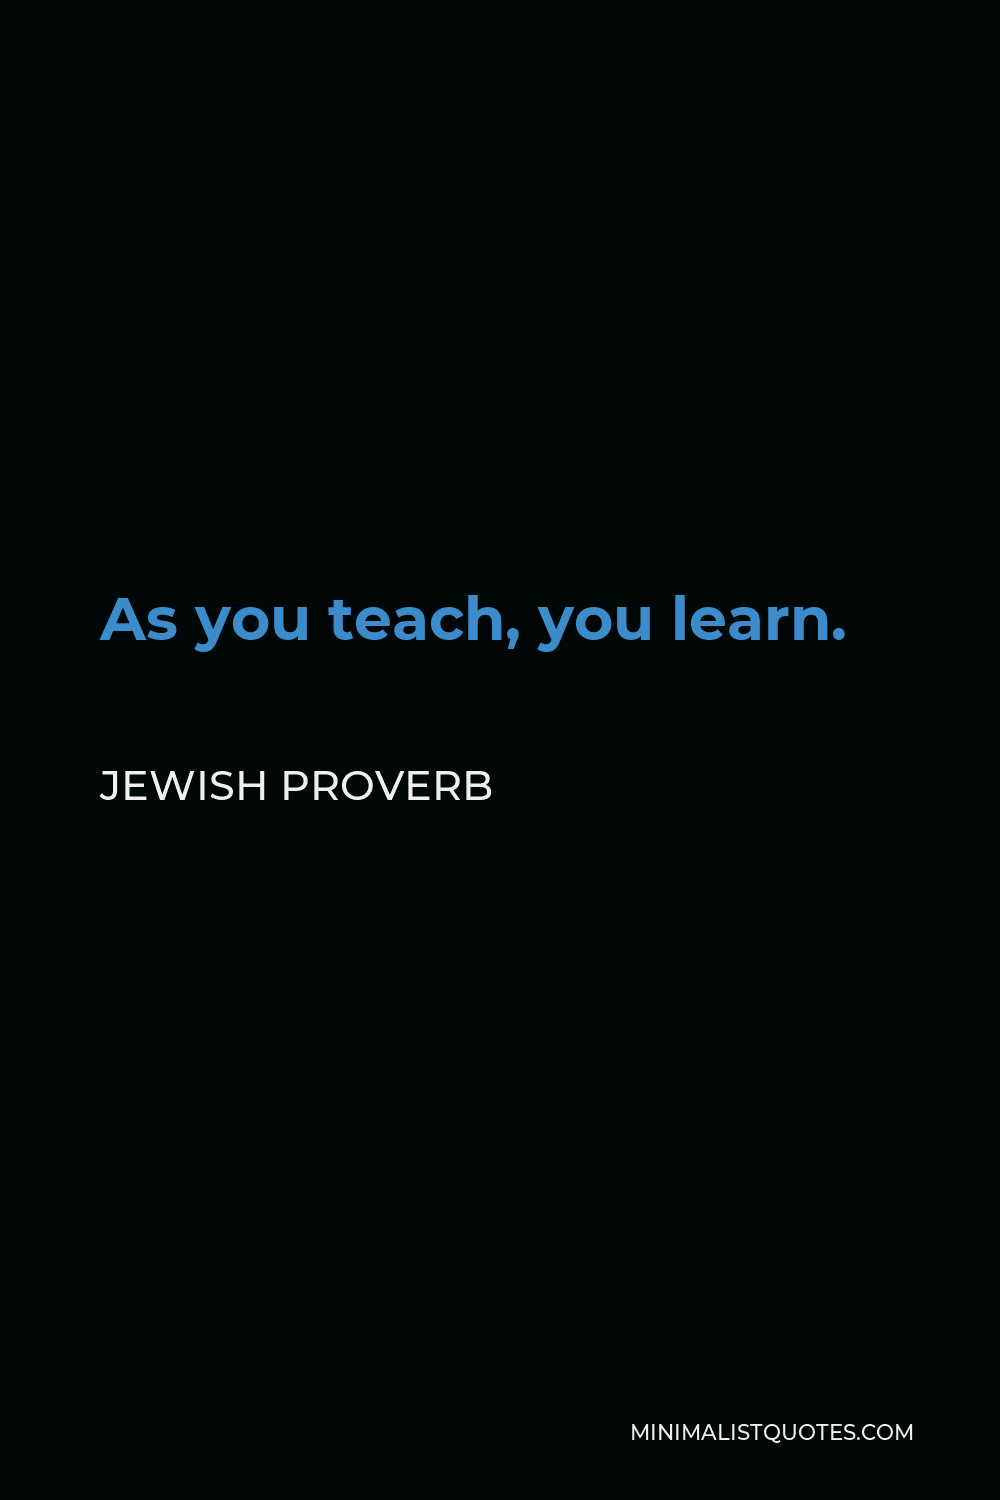 Jewish Proverb Quote - As you teach, you learn.